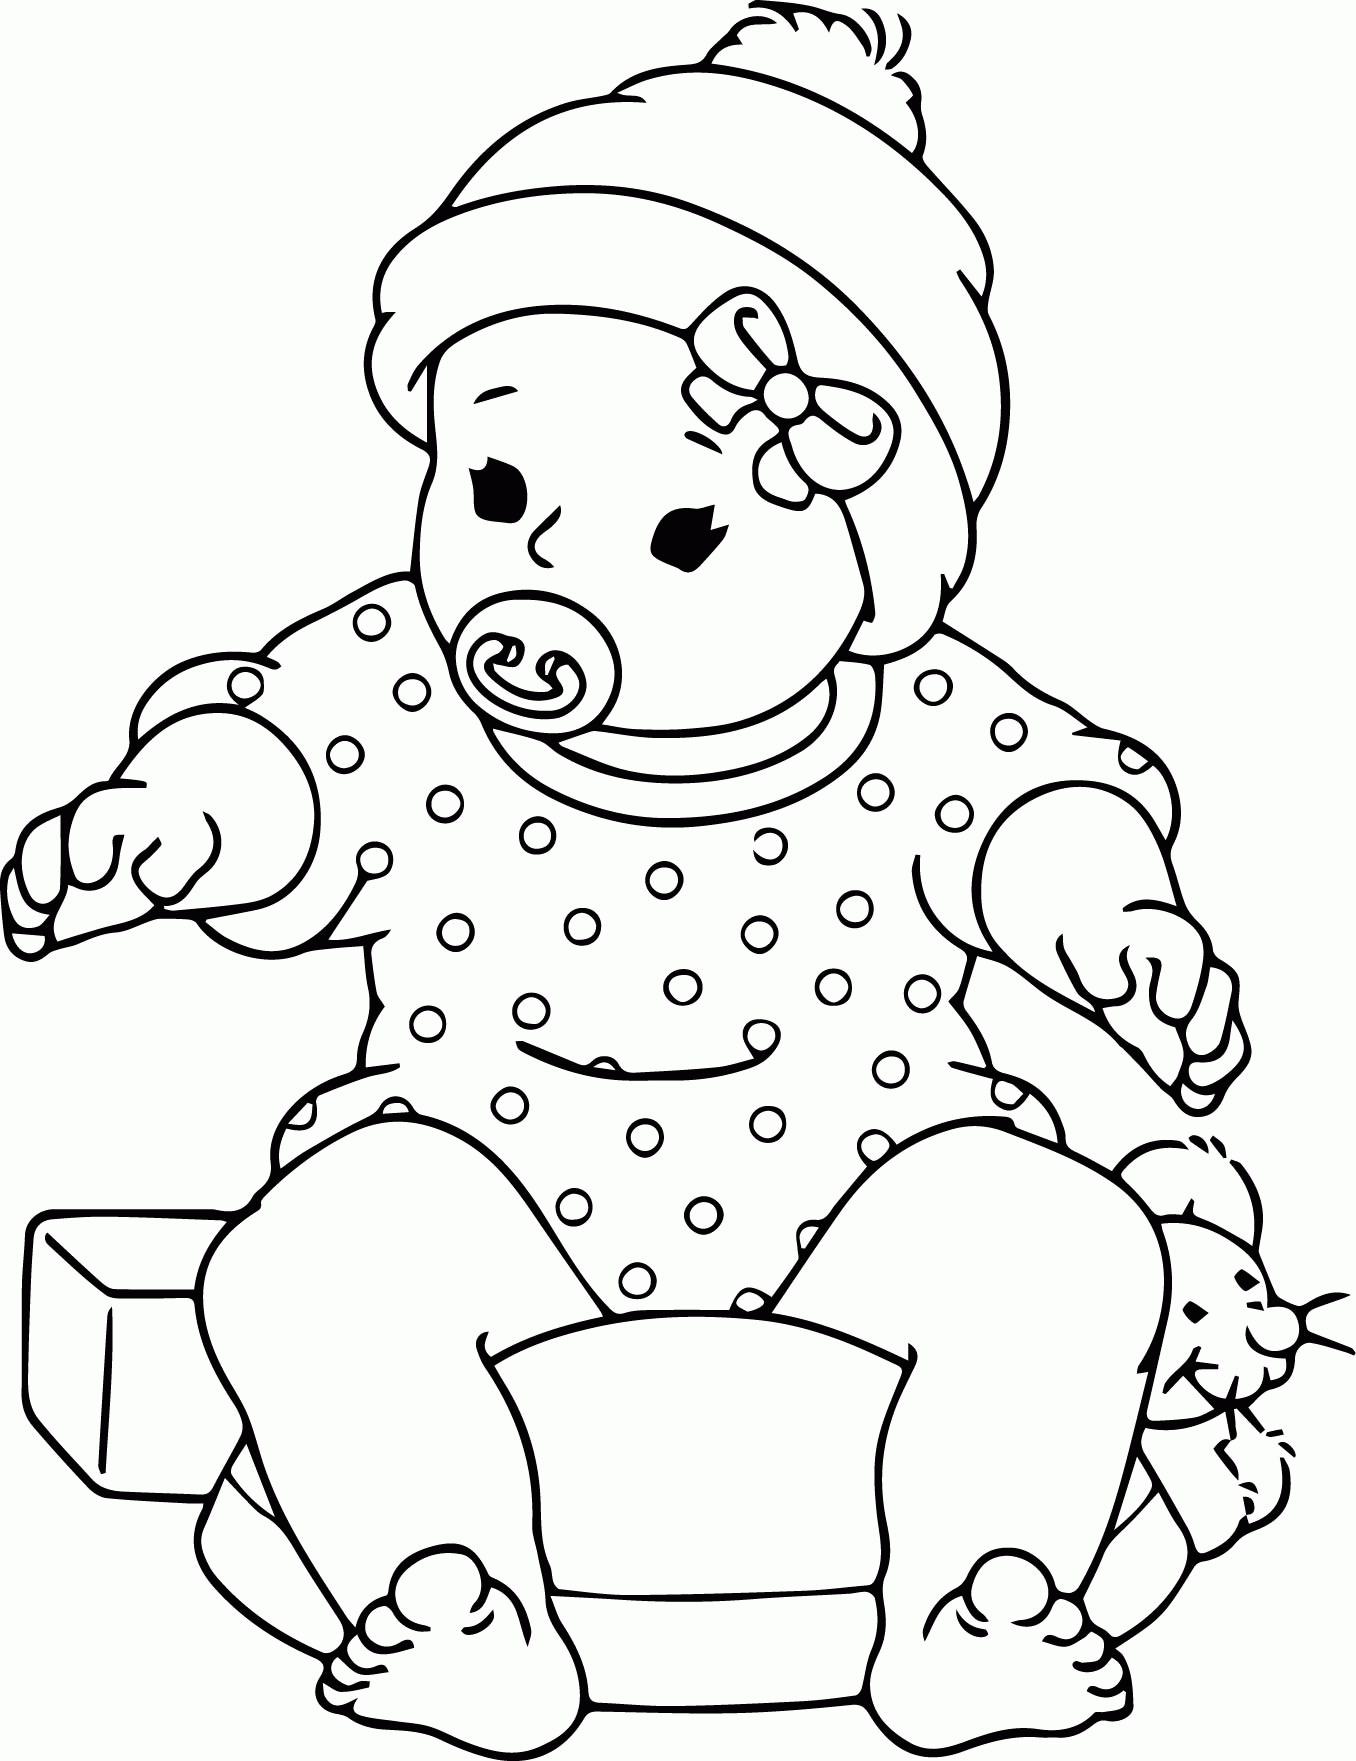 Baby Bubble Coloring Pages - Coloring Pages For All Ages